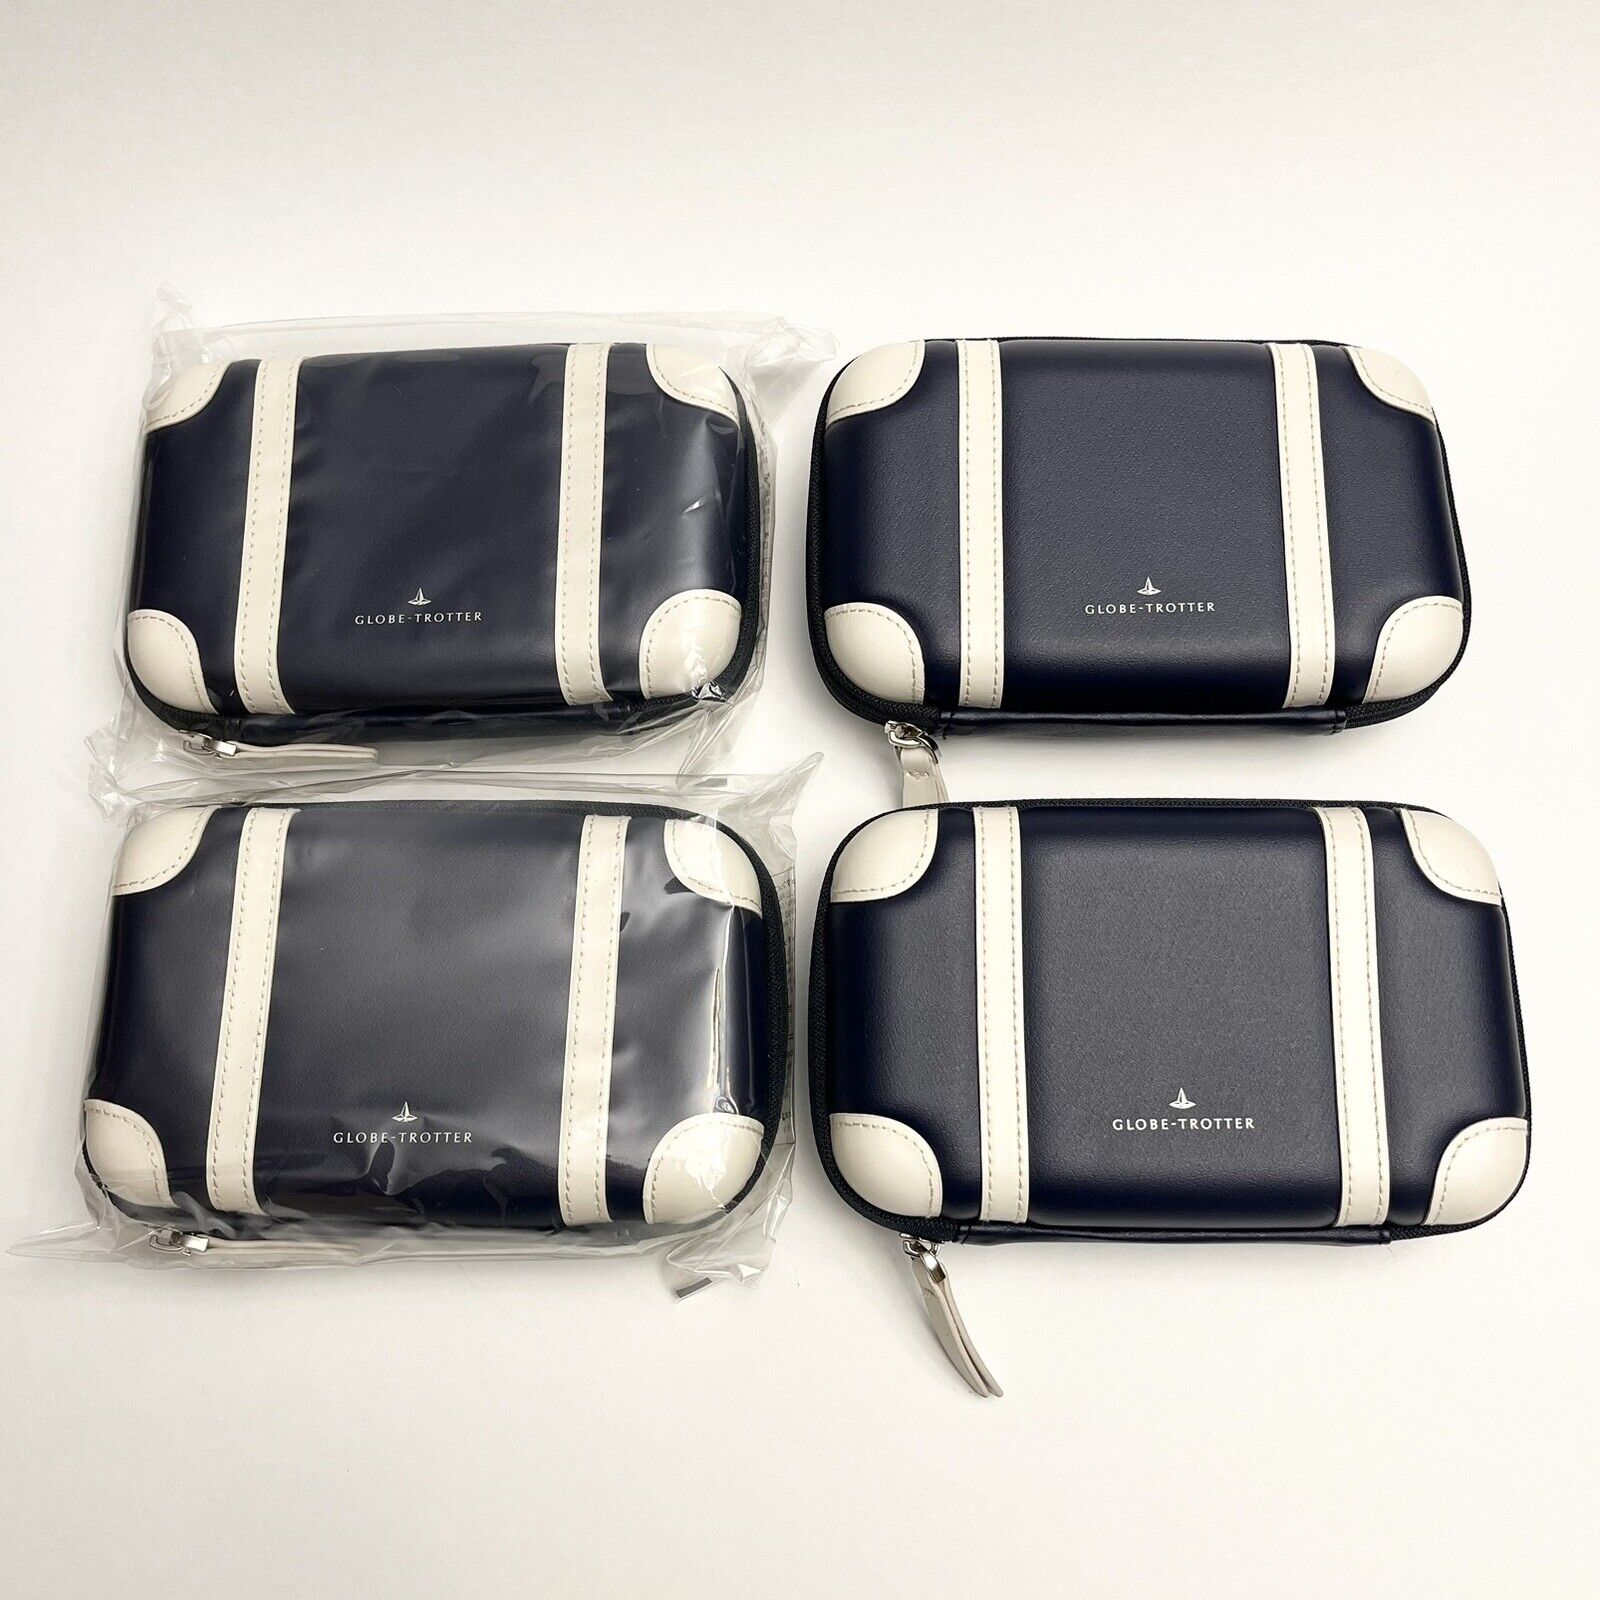 Set of 4 ANA All Nippon Airways Business Class Amenity Kits by Globe-Trotter